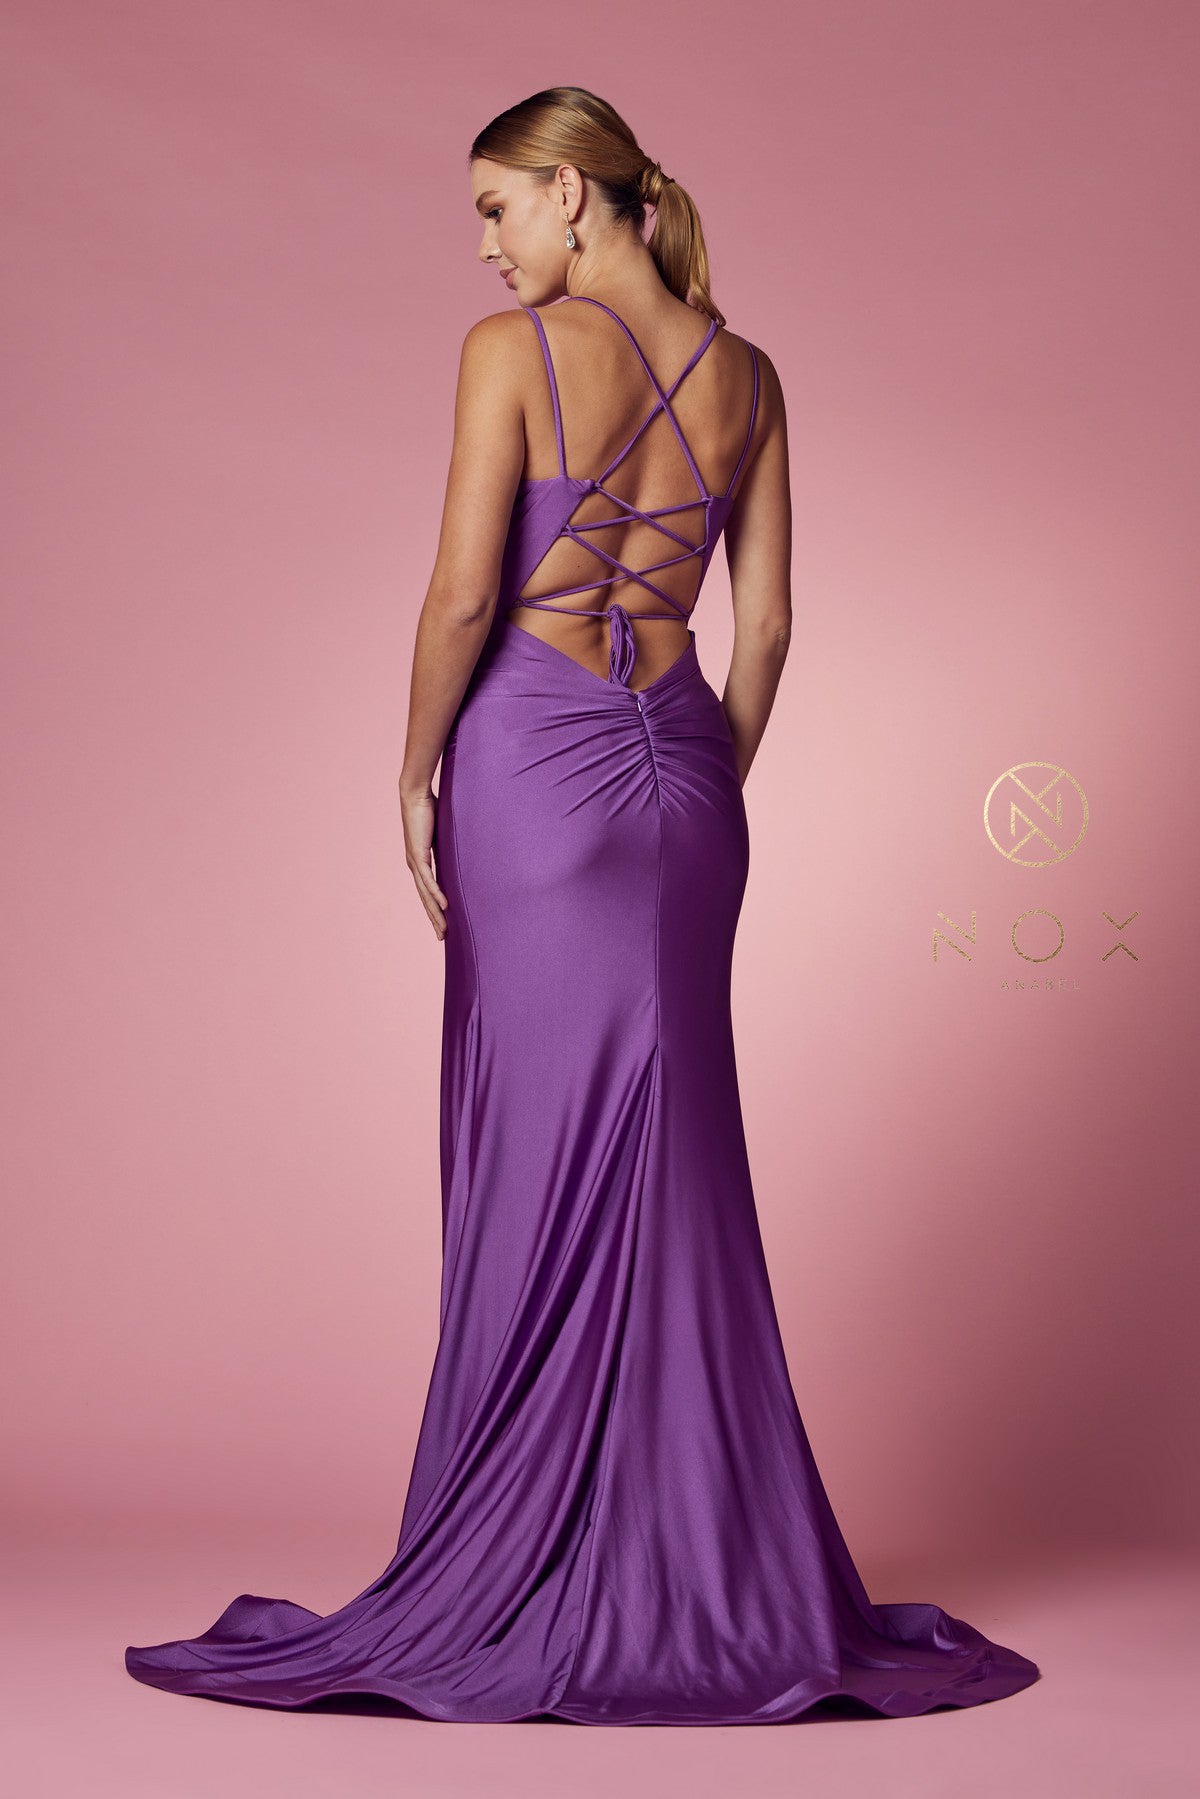 Nox Anabel T481 Long Fitted Jersey Prom Dress Backless Corset Slit Formal Gown Train Sleek and chic with a lightweight feel, this gorgeous scoop neck with spaghetti straps fitted gown by NOX ANNABEL is as cool as it is comfortable. Available Colors: Dusty Rose, Fuchsia, Lavender, Neon Orange, Black, Red, Sunflower, Iris